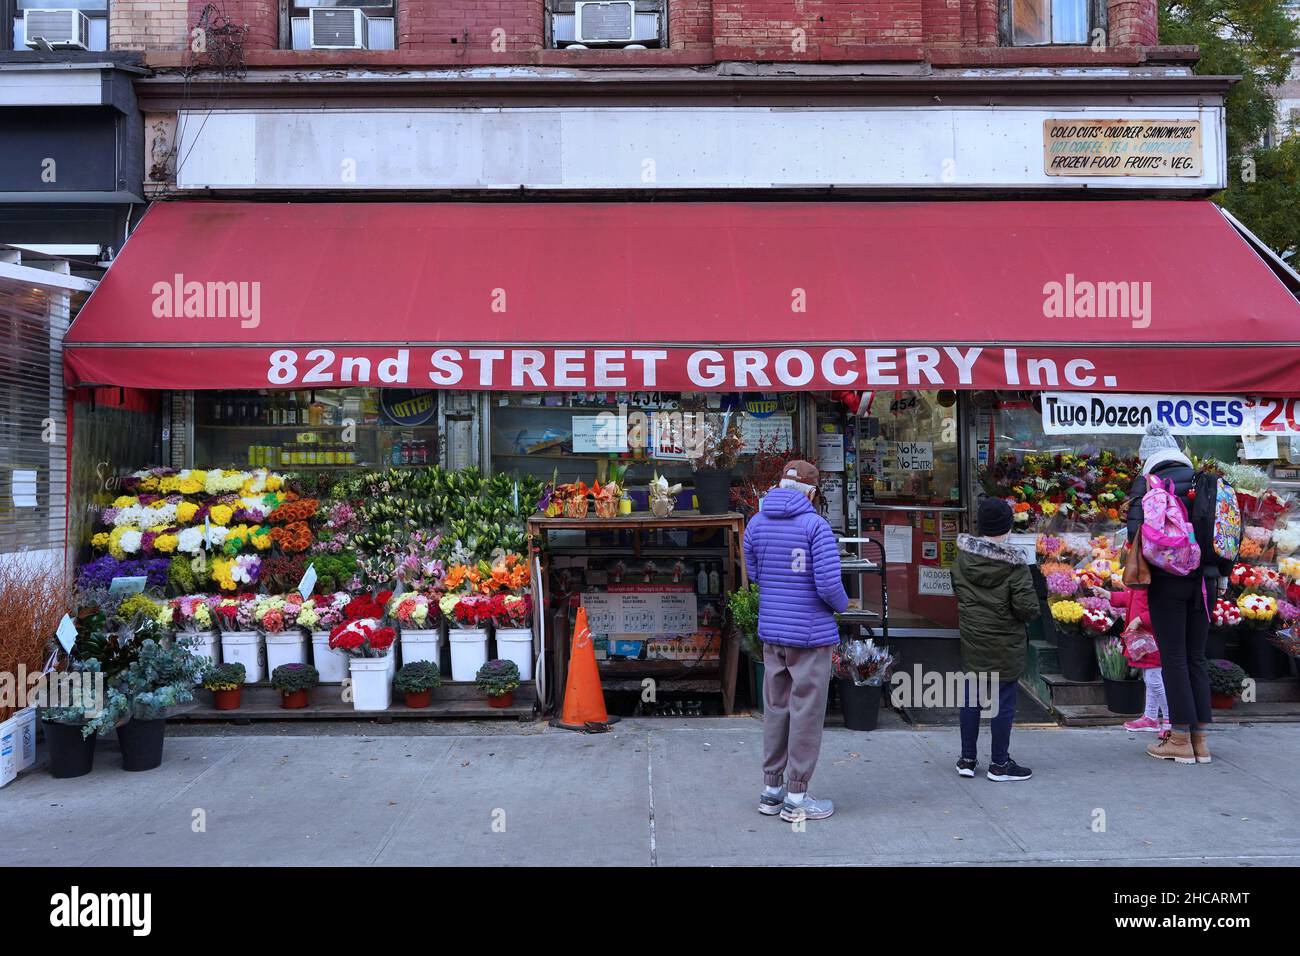 New York, NY - November 15, 2021:  Shoppers outside an old fashioned local grocery store with colorful outdoor display of flowers Stock Photo